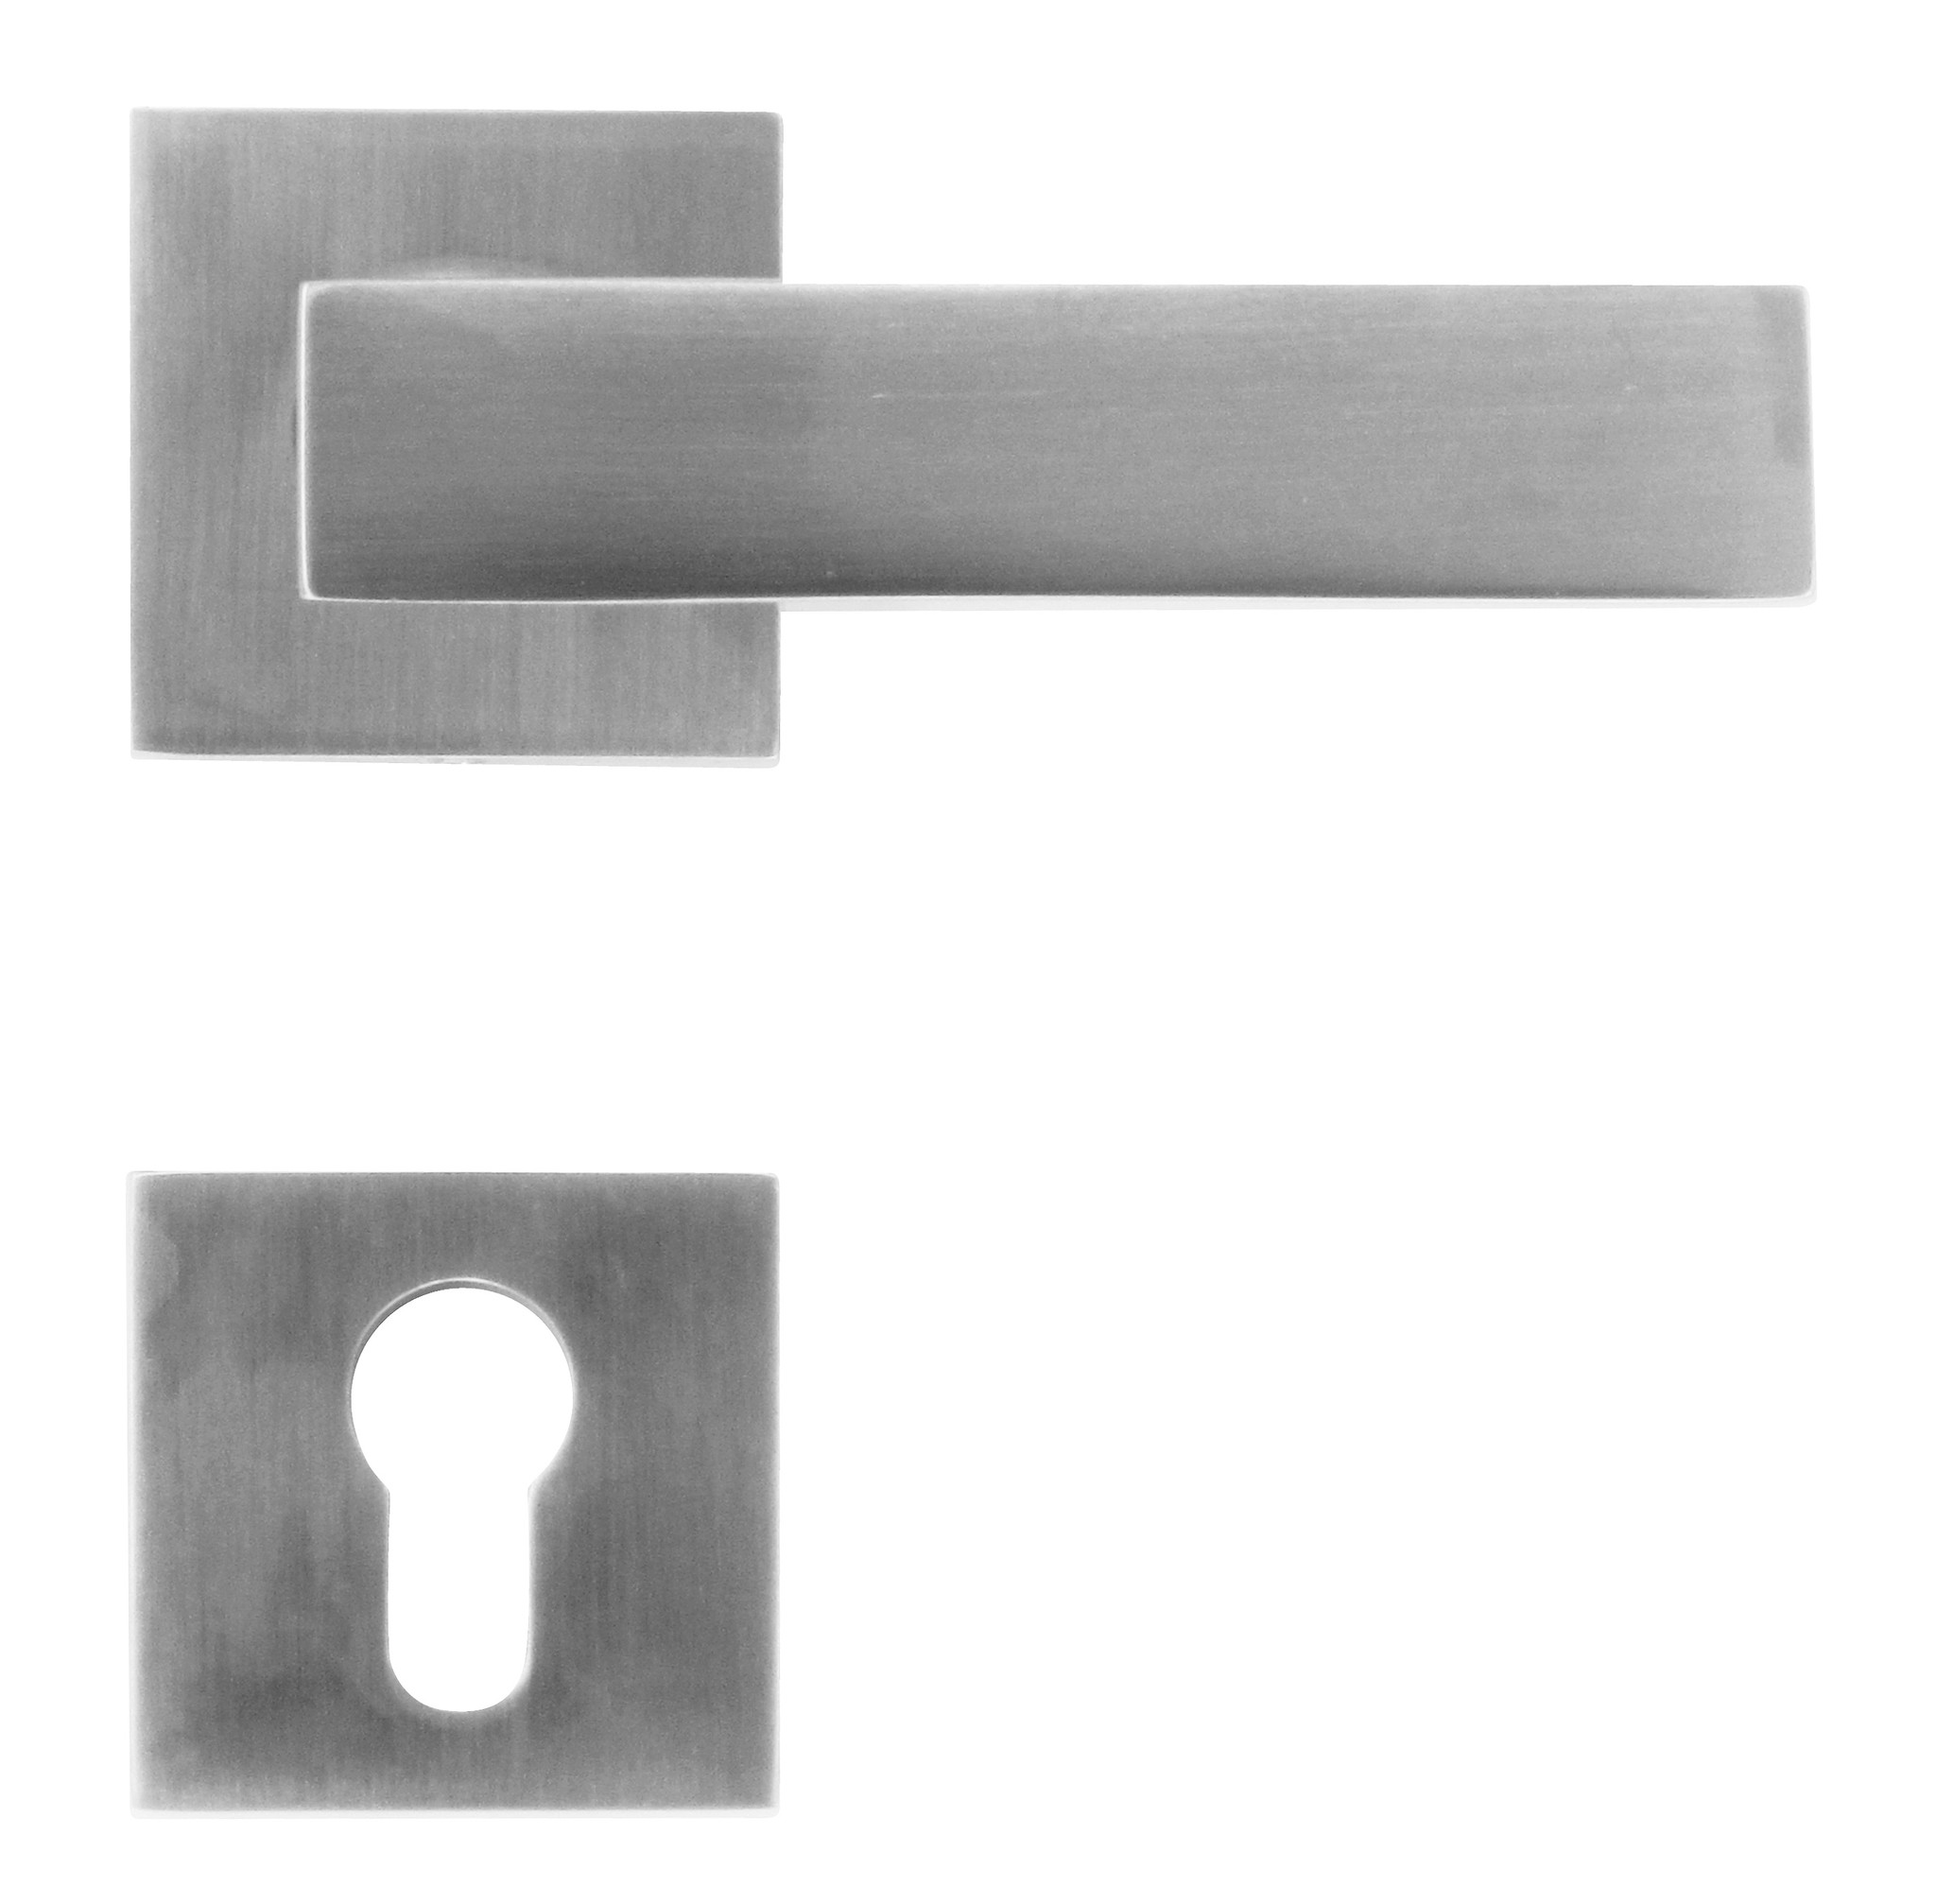 Solid stainless steel door handles for a cylinder lock